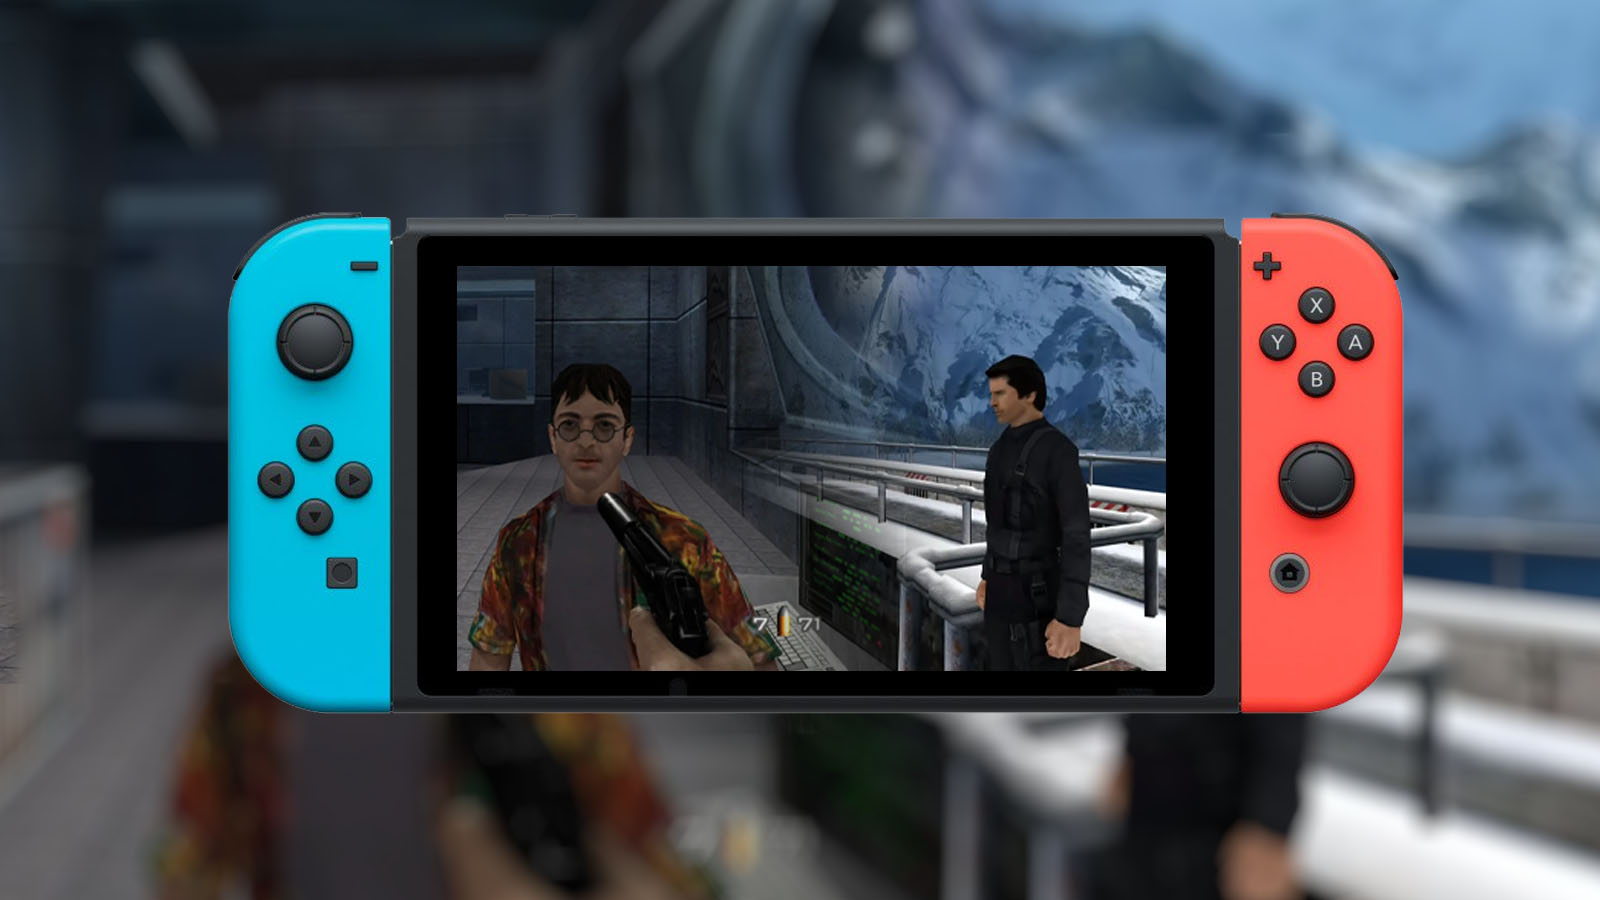 GoldenEye 007 comes to Nintendo Switch Online this week!